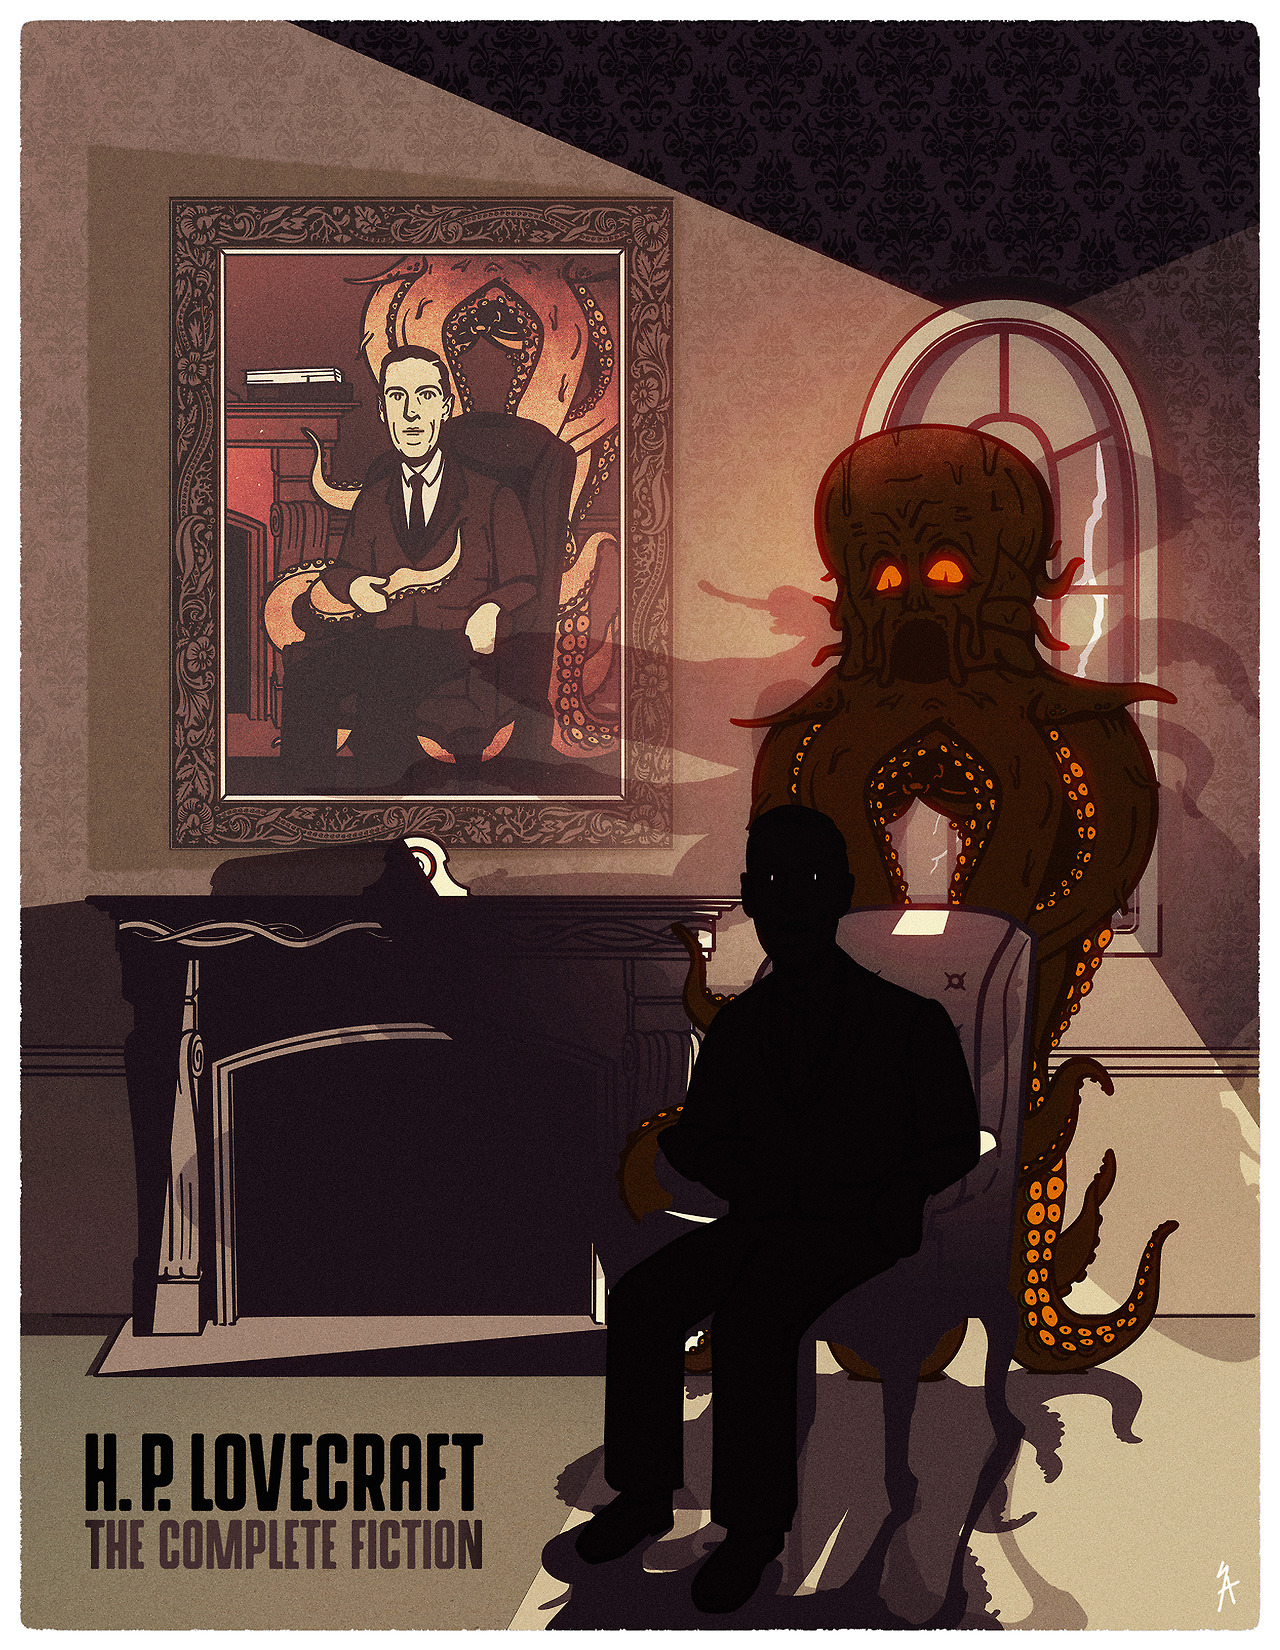 H.P. Lovecraft - The Complete Fiction cover (giant gif -> https://giphy.com/gifs/horror-illustration-dark-l378yJ3huSnDZ7VUk/fullscreen ) me - selin arisoy - http://nocter.tumblr.com/ — Immediately post your art to a topic and get feedback. Join our...